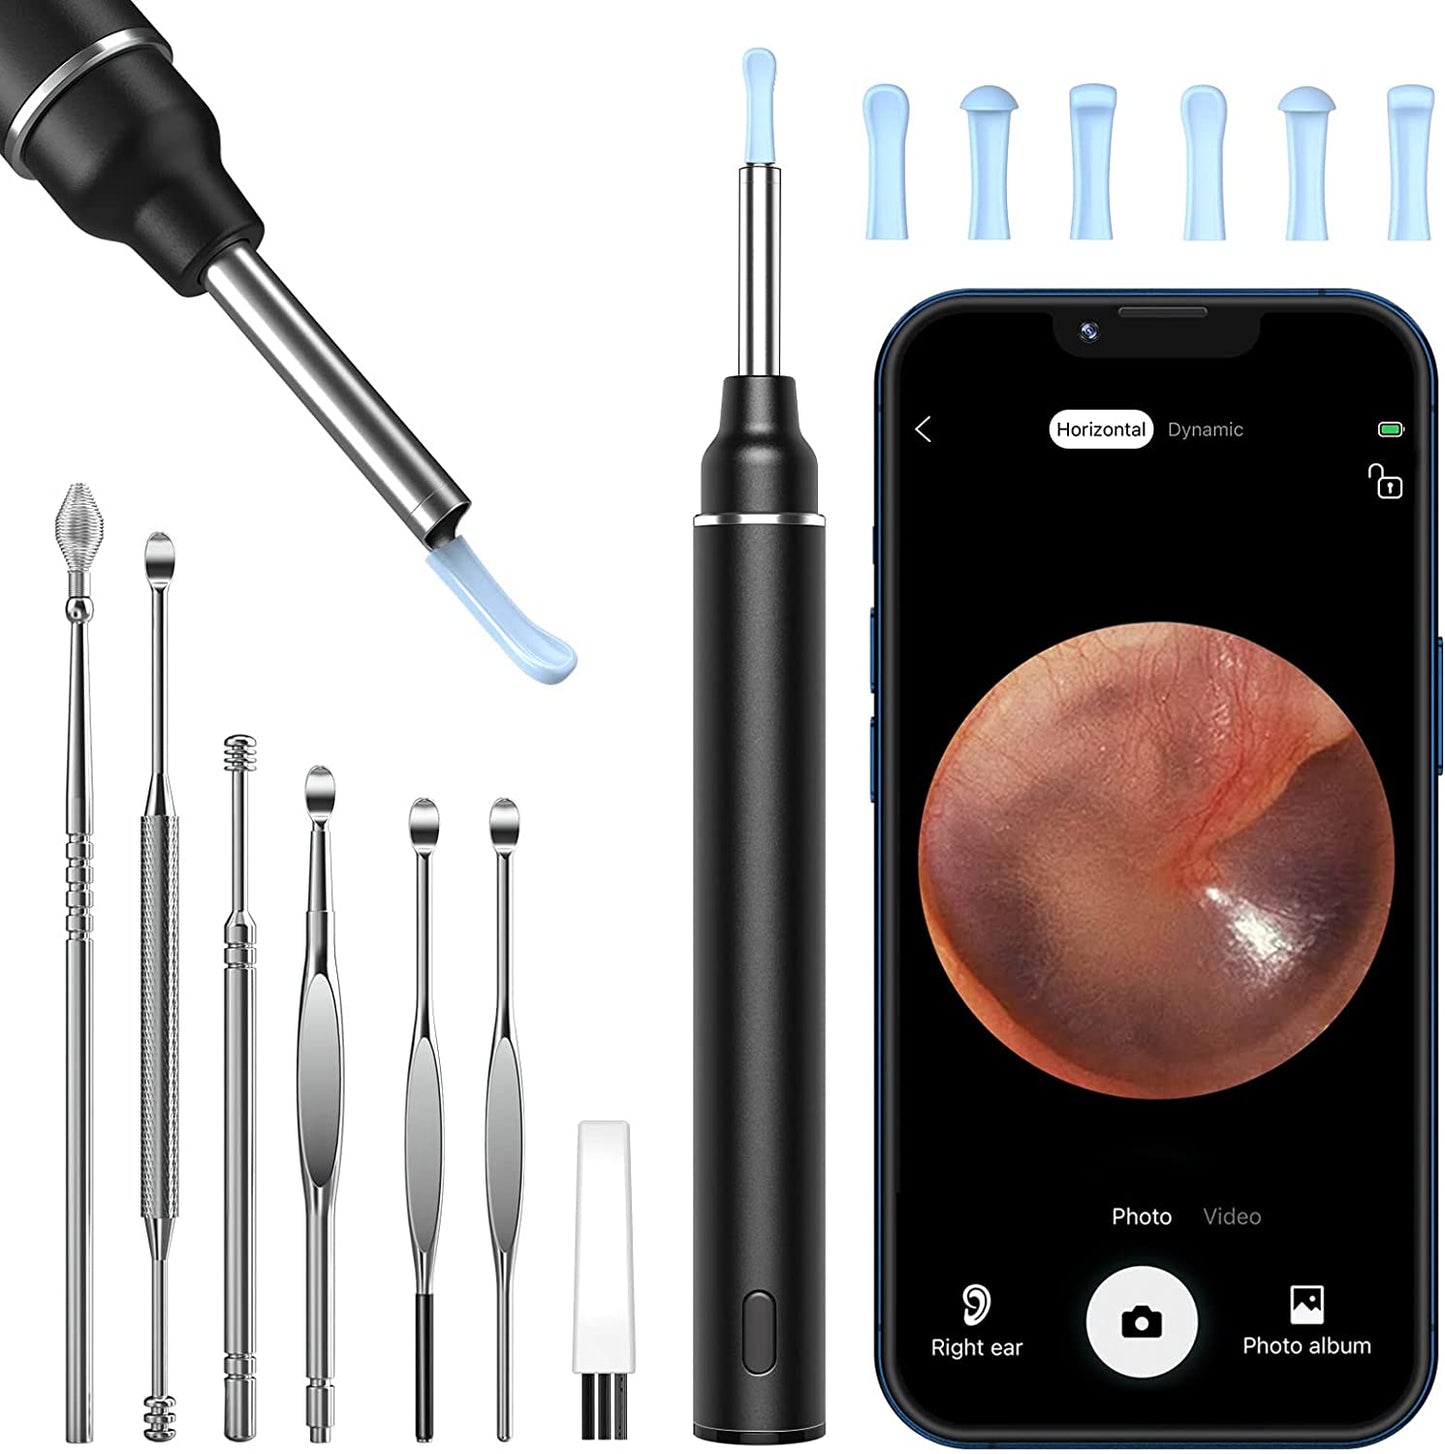 VITCOCO Ear Wax Removal Kit Ear Camera 1920P HD Ear Wax Removal Tool Ear Cleaner Otoscope with 6 LED Lights, 3mm Visual Ear Scope for iPhone iPad Android